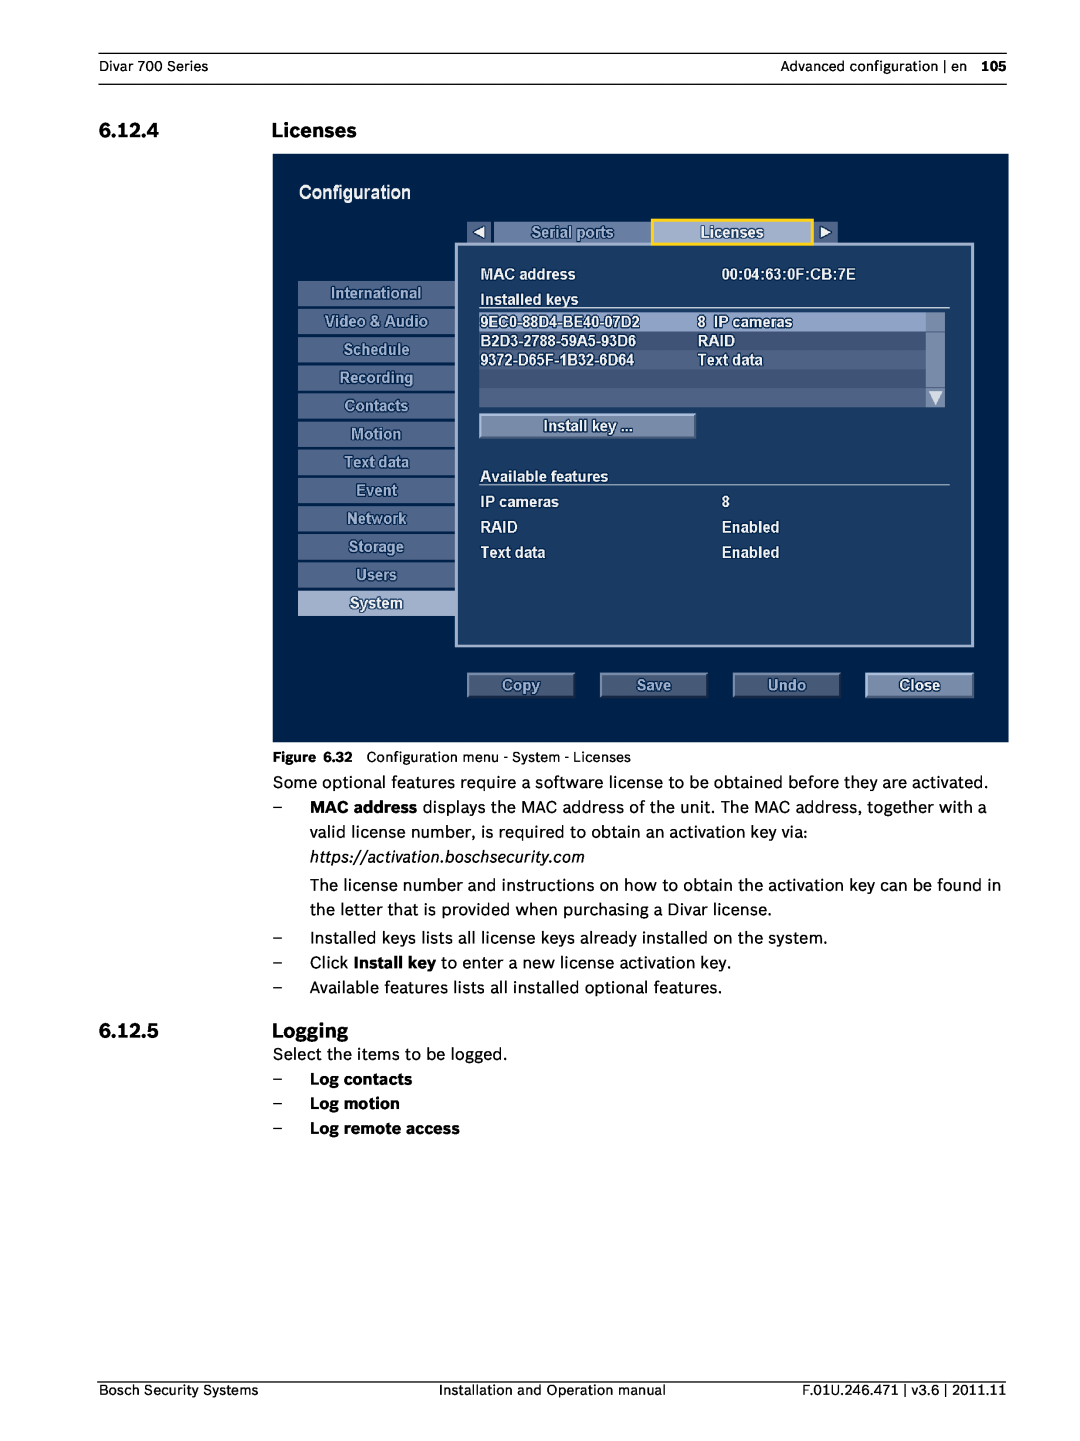 Bosch Appliances 700 operation manual 6.12.4Licenses, 6.12.5Logging, Log contacts –Log motion –Log remote access 